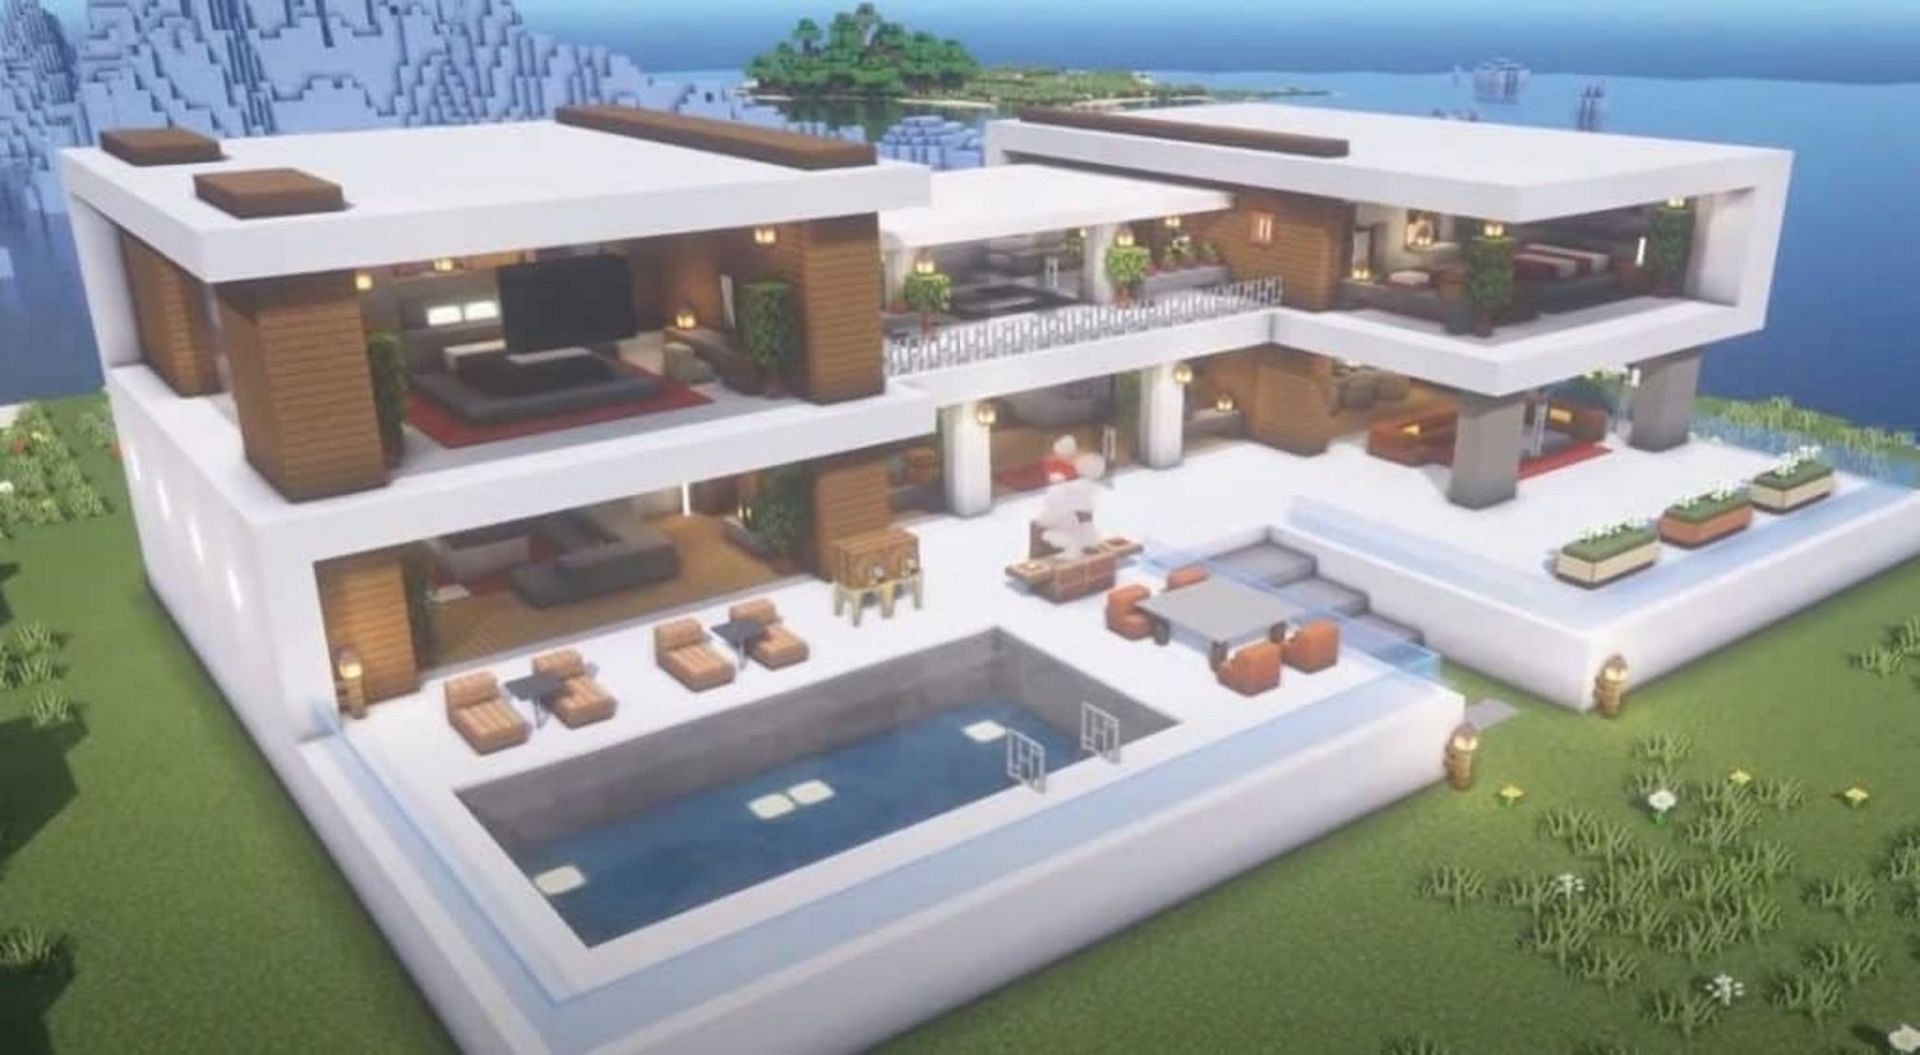 This home is so nice that players may never want to leave (Image via IrieGenie/YouTube)